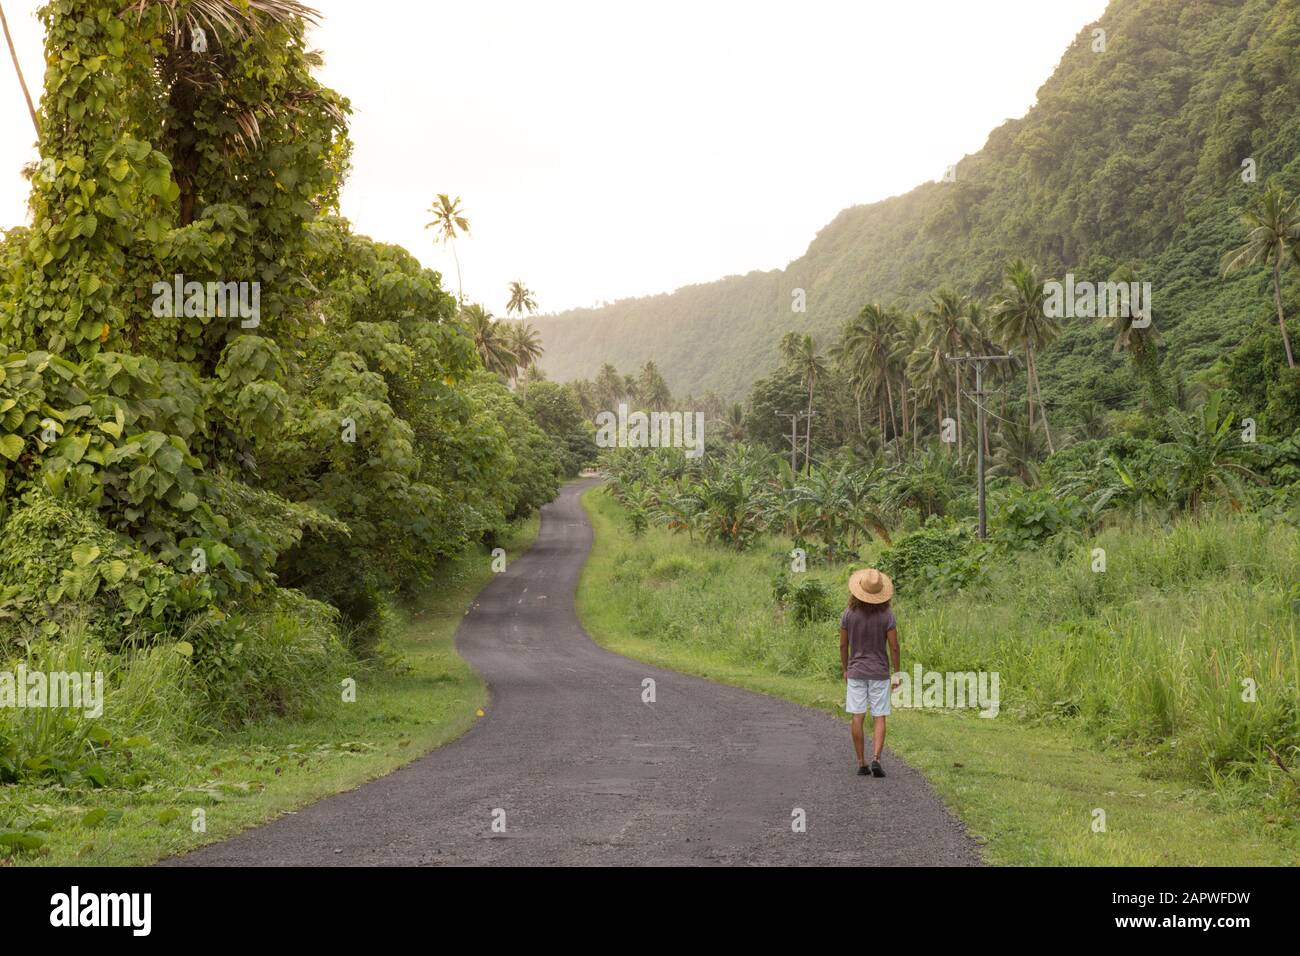 Man with sun hat and curly hair walking on empty road in tropical area Stock Photo